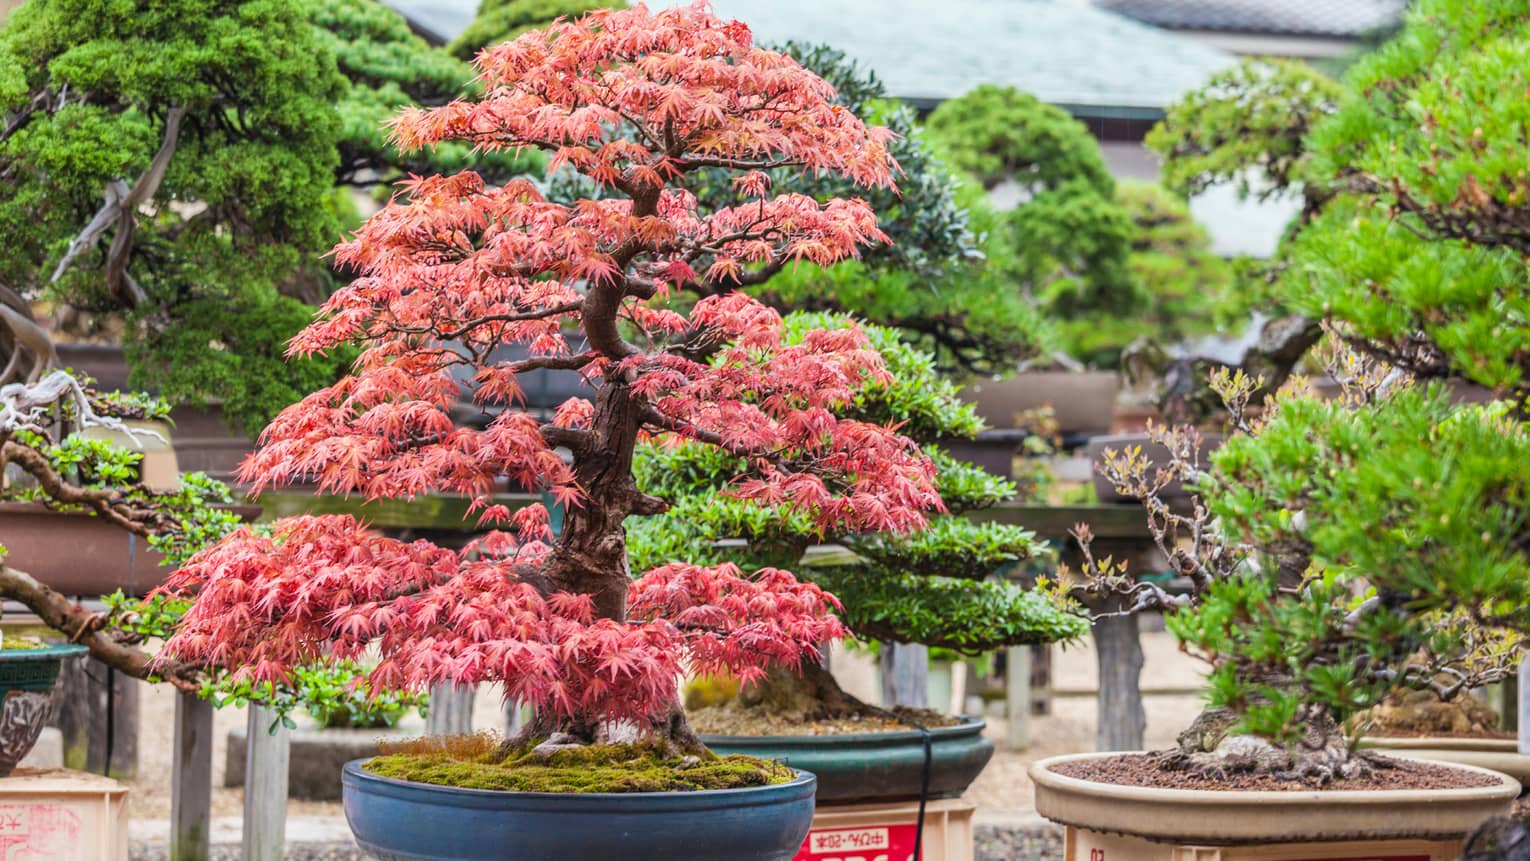 Close-up view of a red-leafed Japanese maple, moss at its base, amid large bonsais in shallow pots.